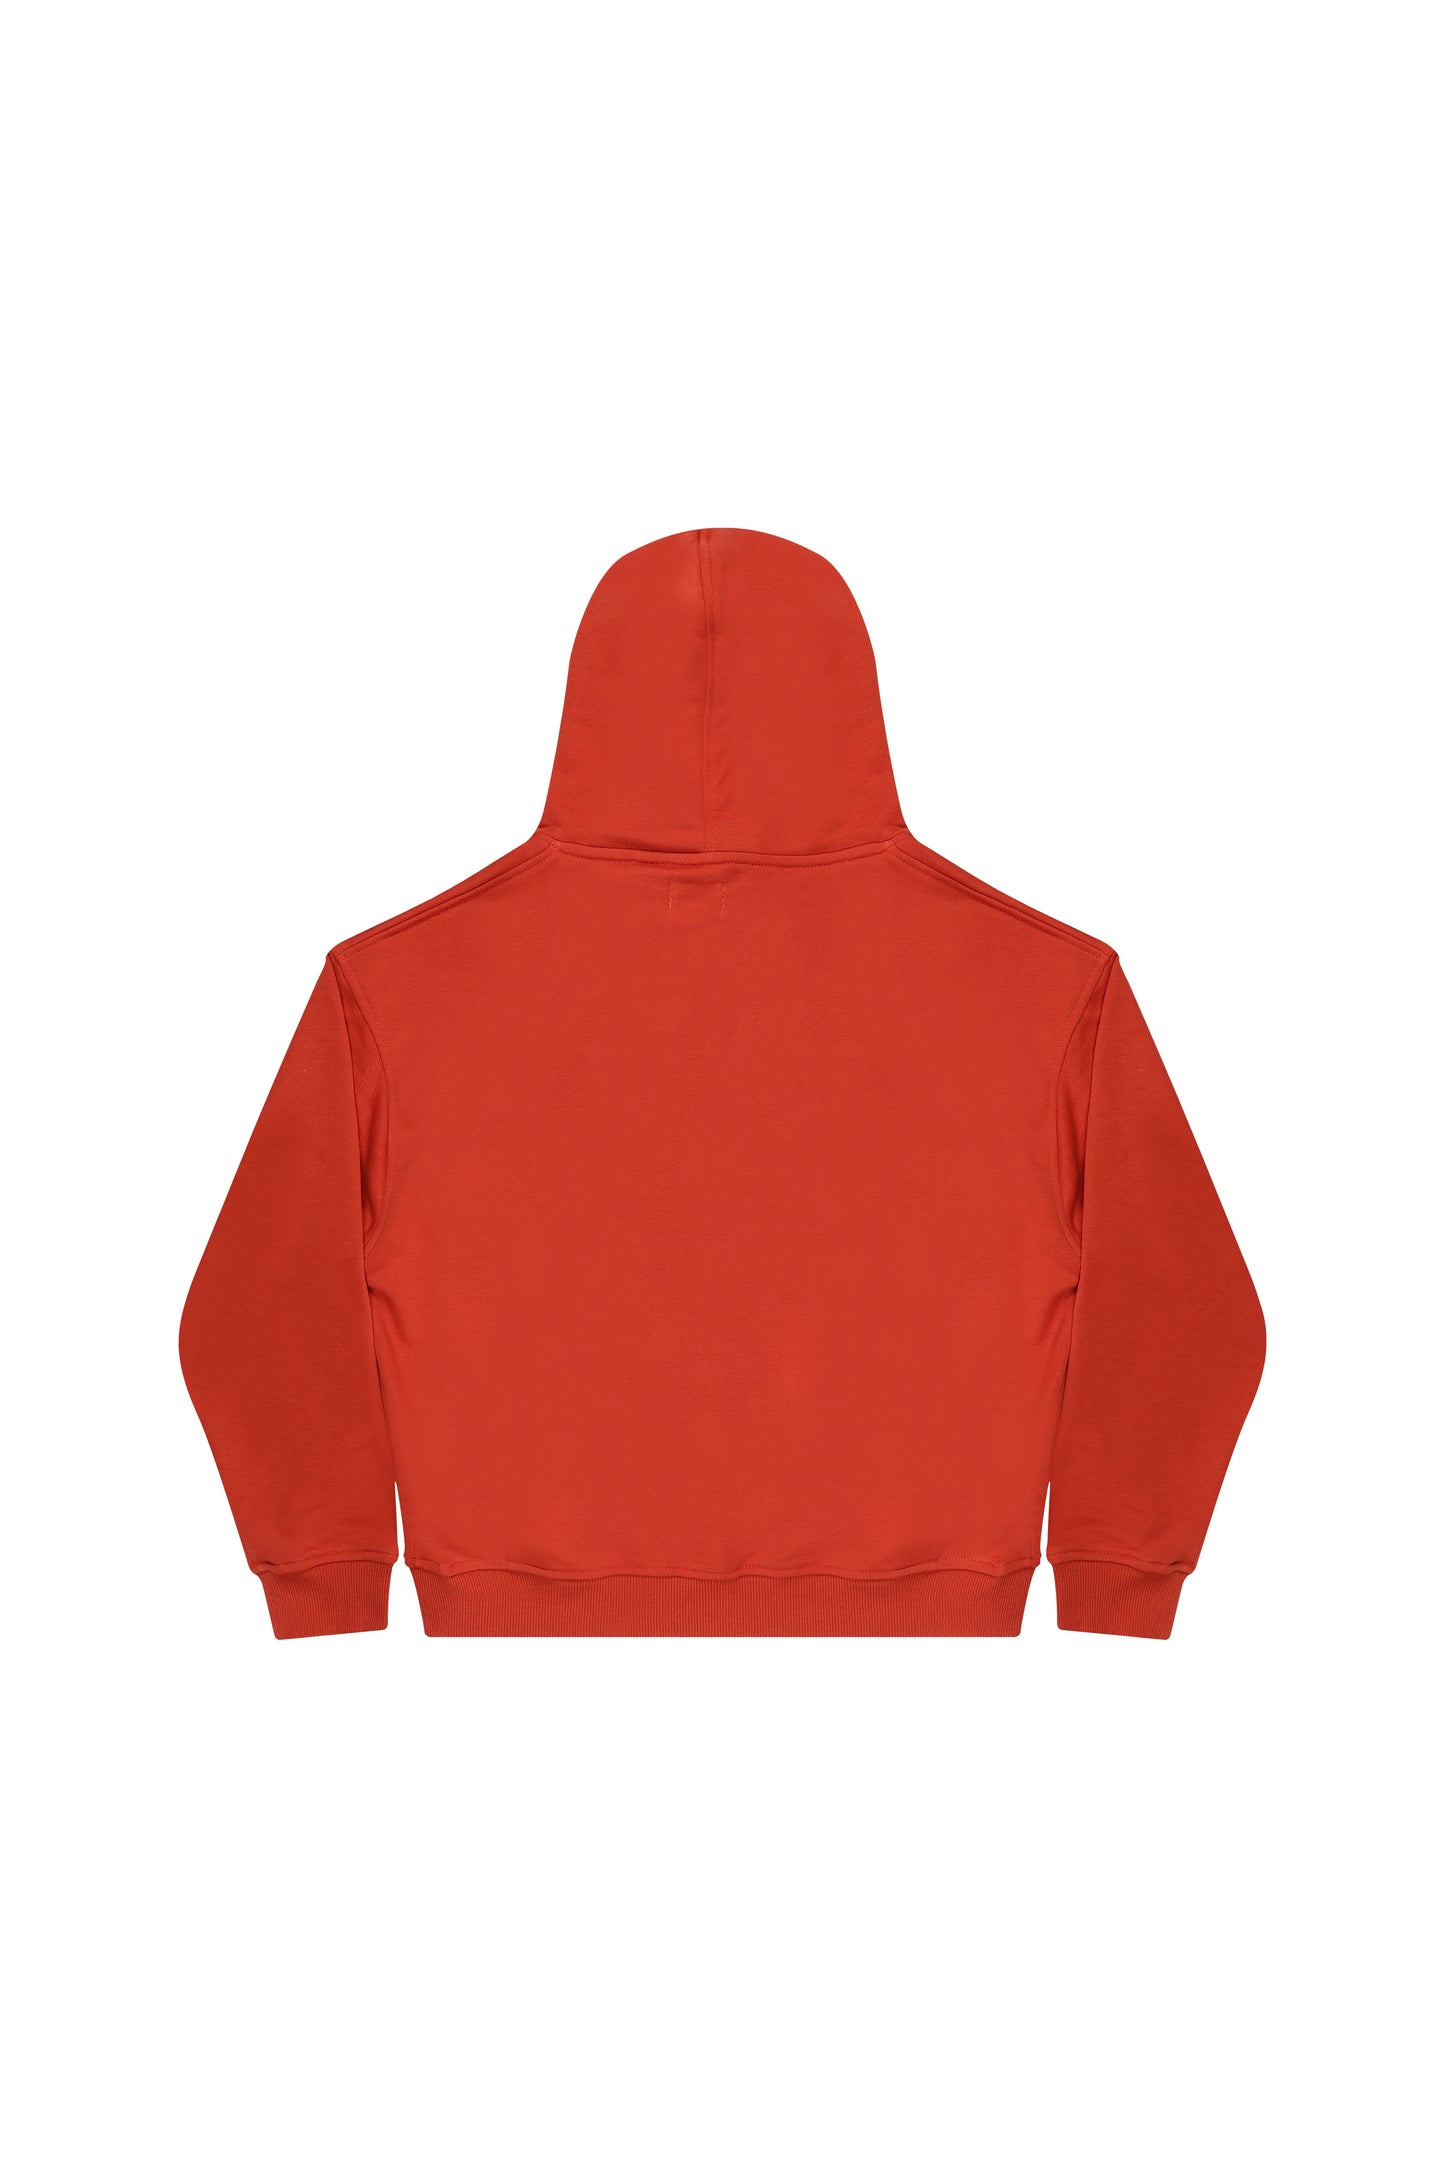 Matchy Hoodie - Red